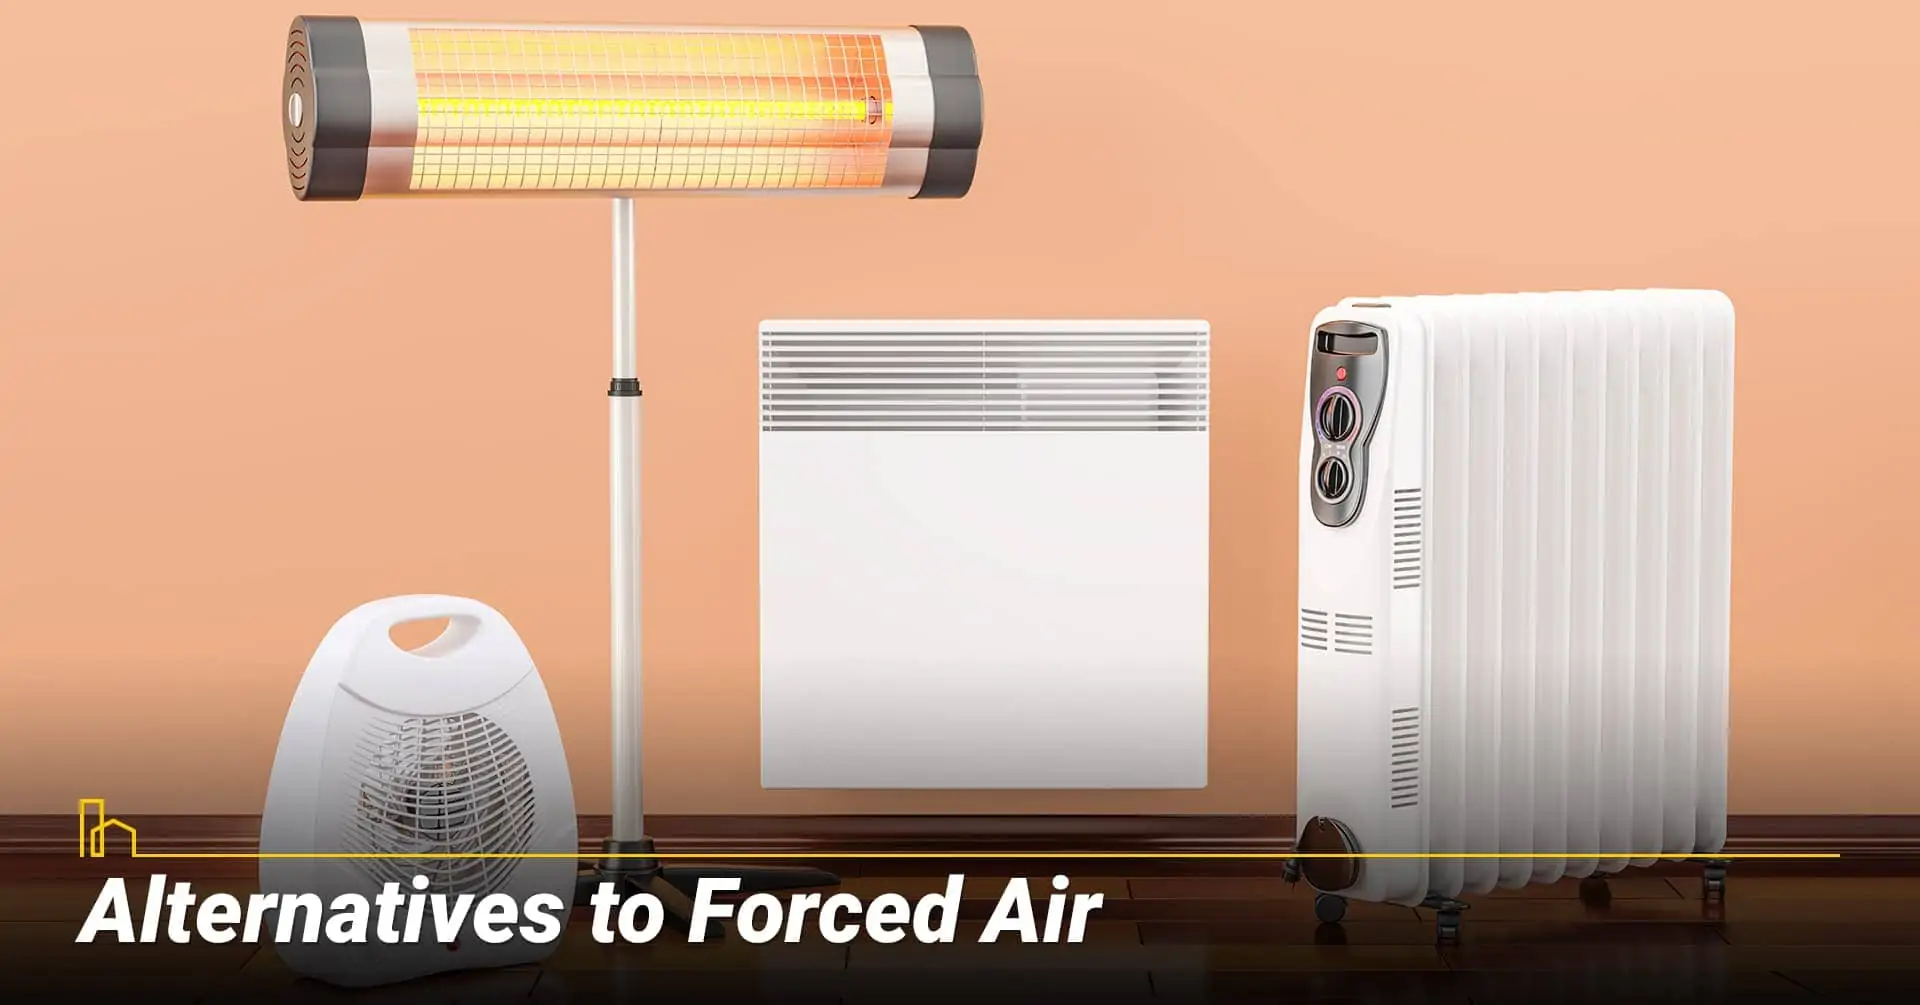 Alternatives to Forced Air, other heating options